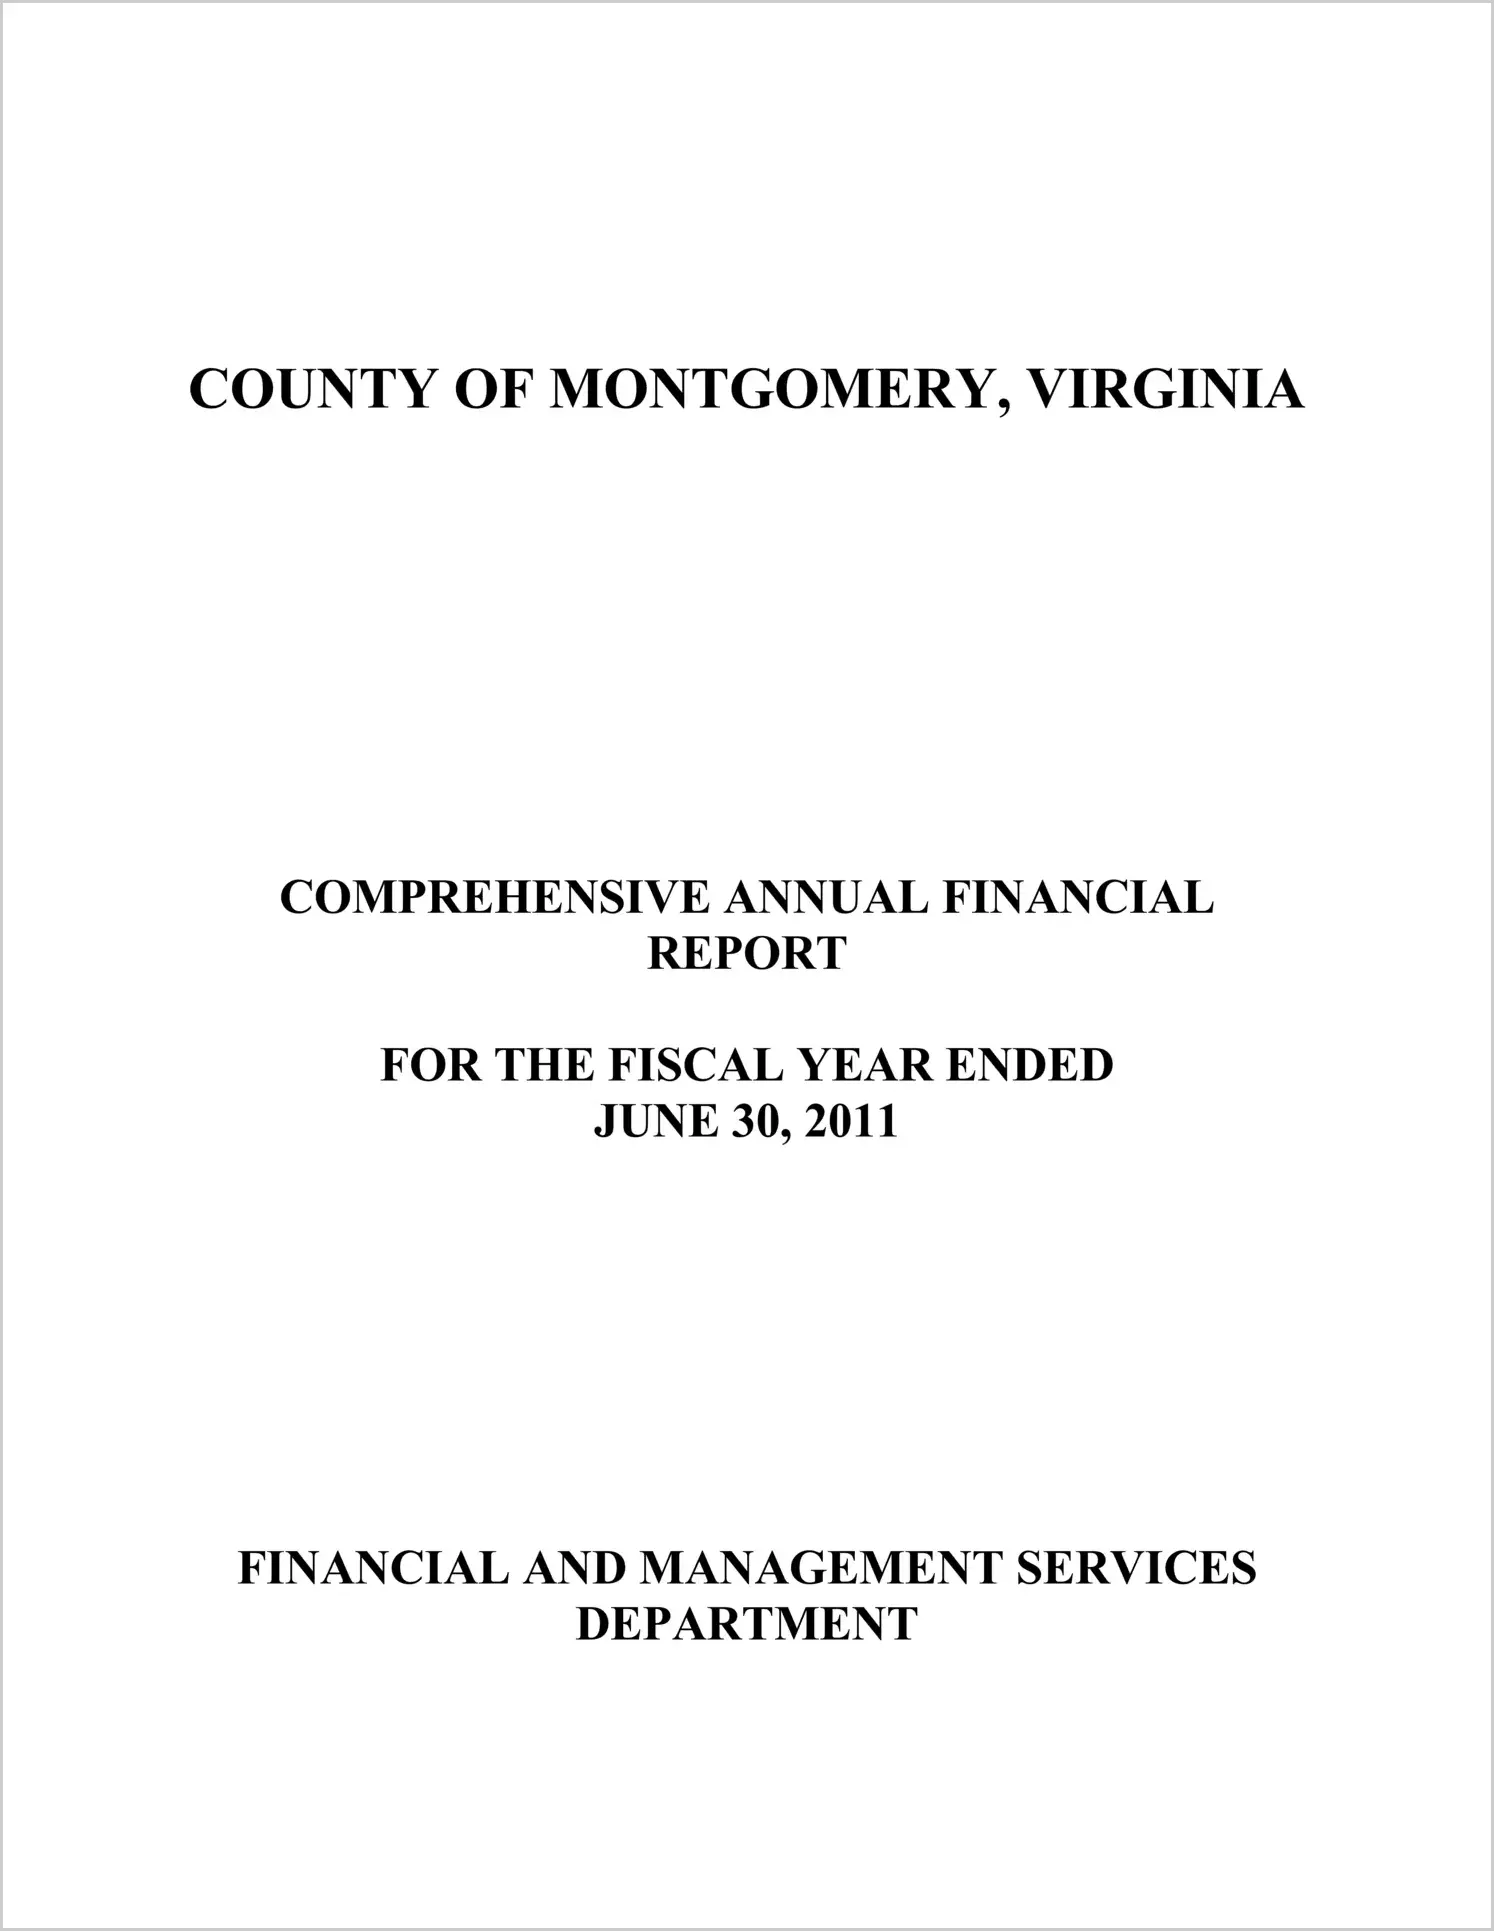 2010 Annual Financial Report for County of Montgomery